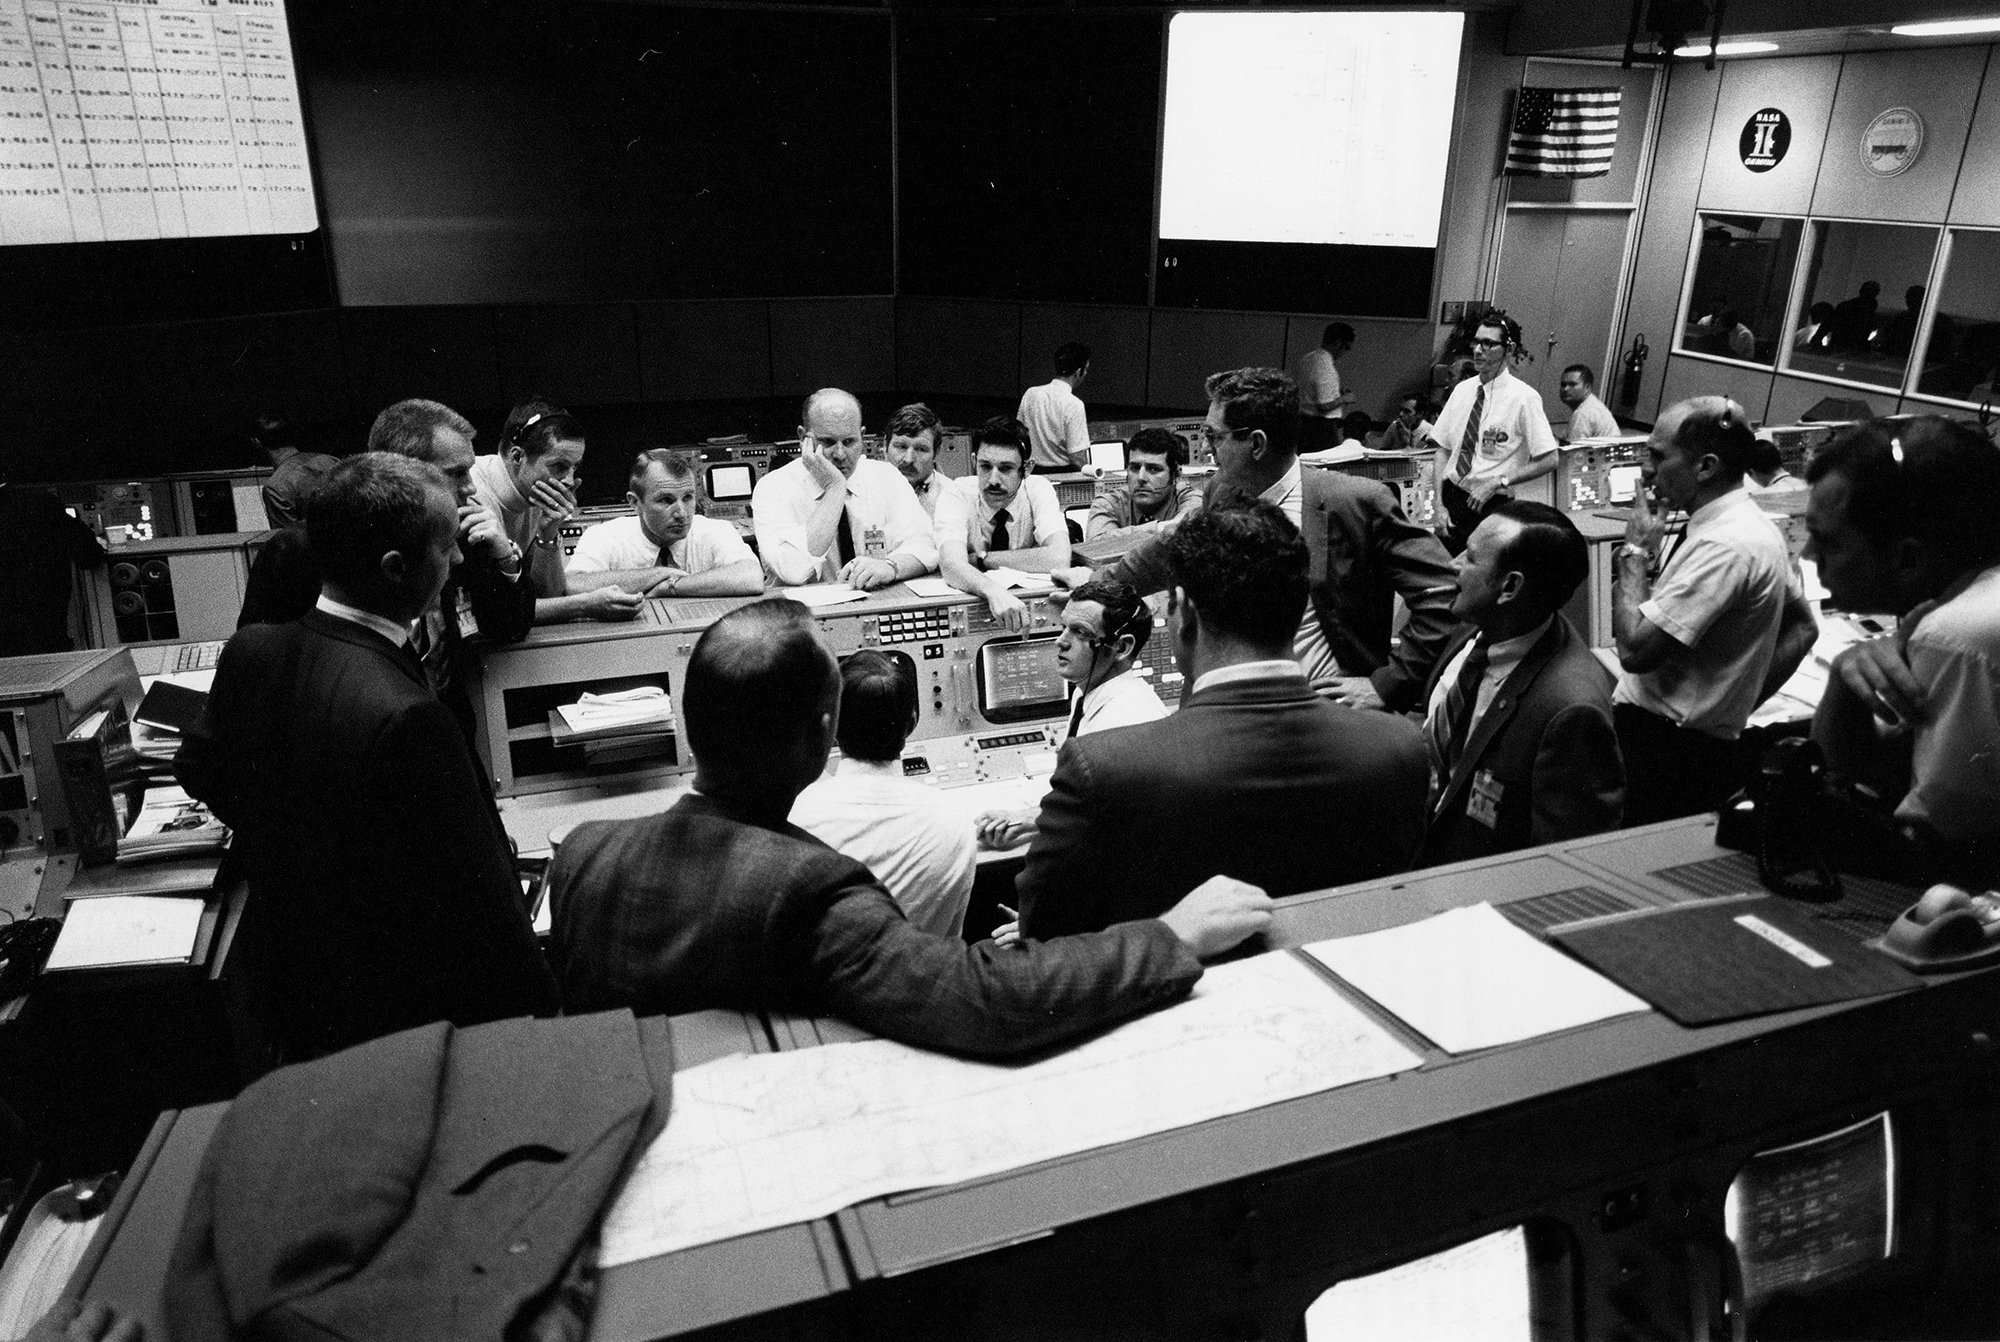 mission-control-during-final-24-hours-of-apollo-13-mission.jpg